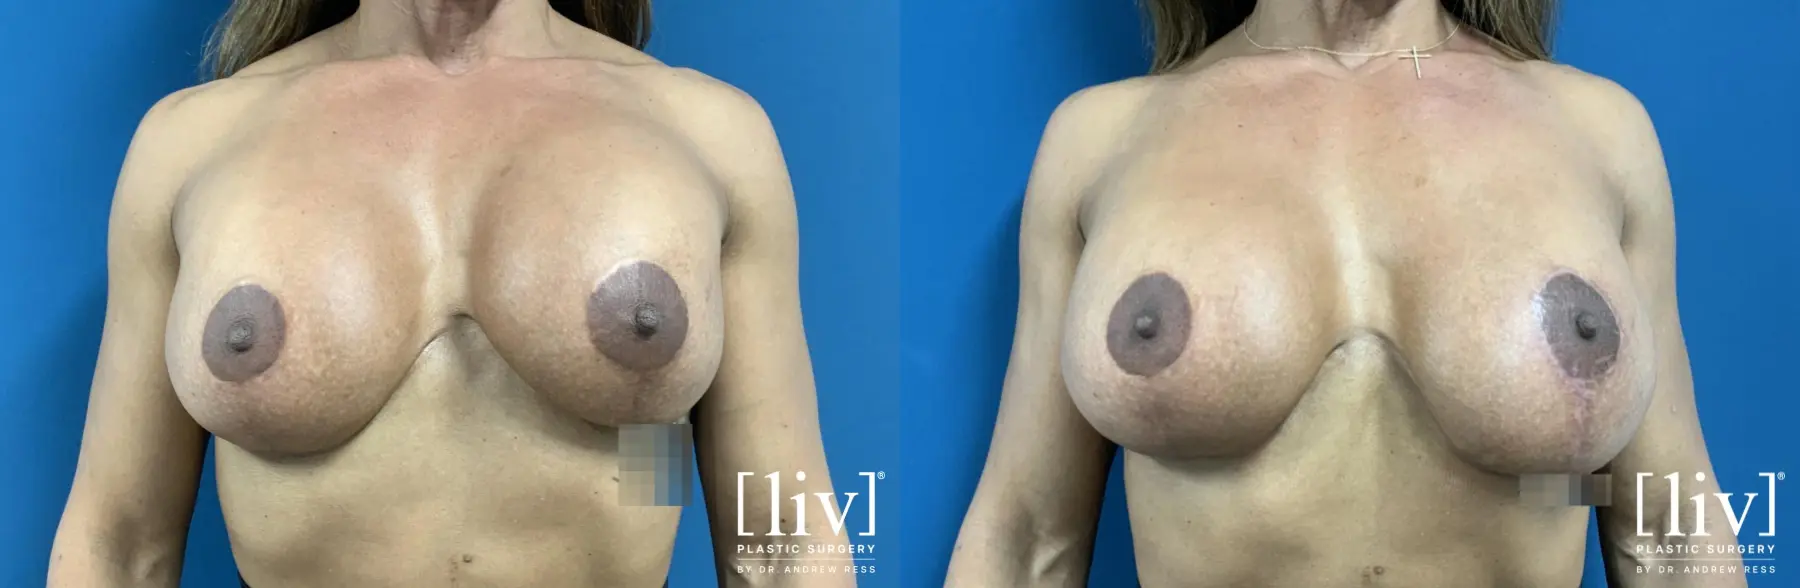 Breast Implant Exchange and Capsulectomy - Before and After 1